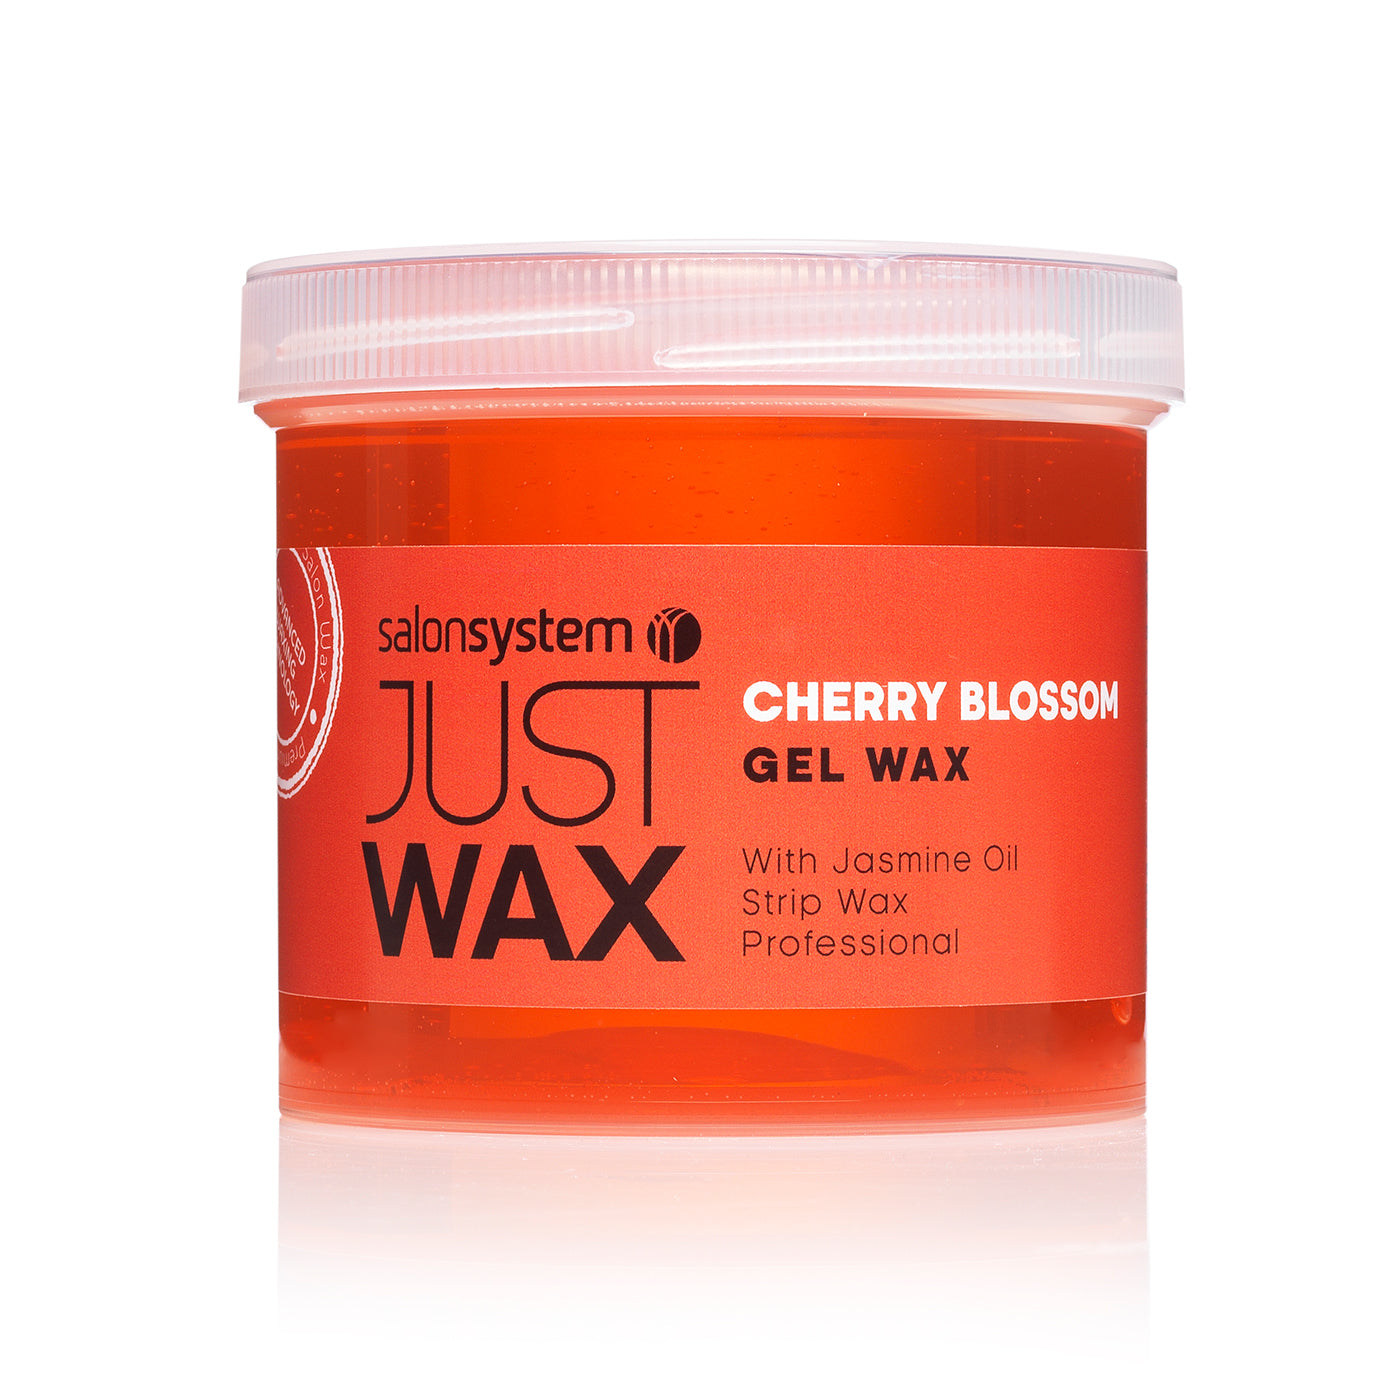 Just Wax Cherry Blossom Gel Wax (450g) - Ultimate Hair and Beauty